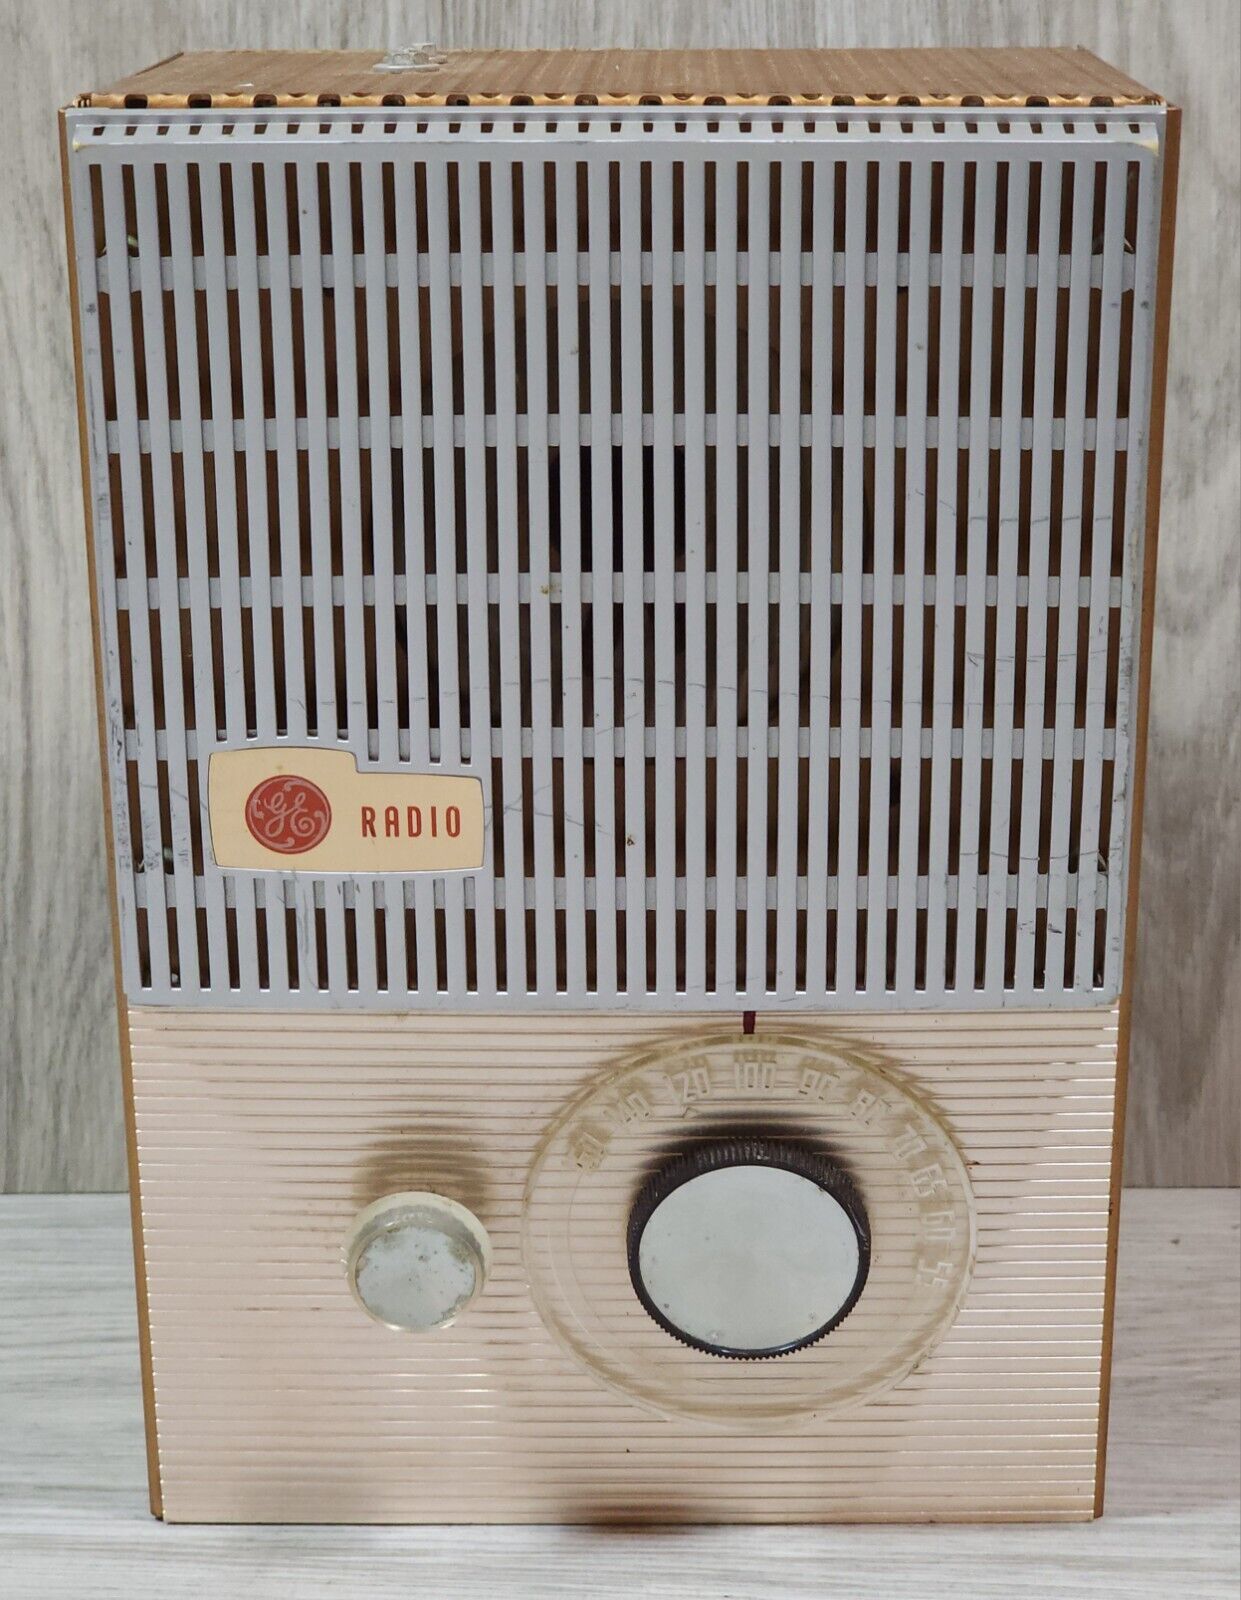 General Electric Tube Radio 495 AM GE Vintage 1950s Mid Century - TESTED -